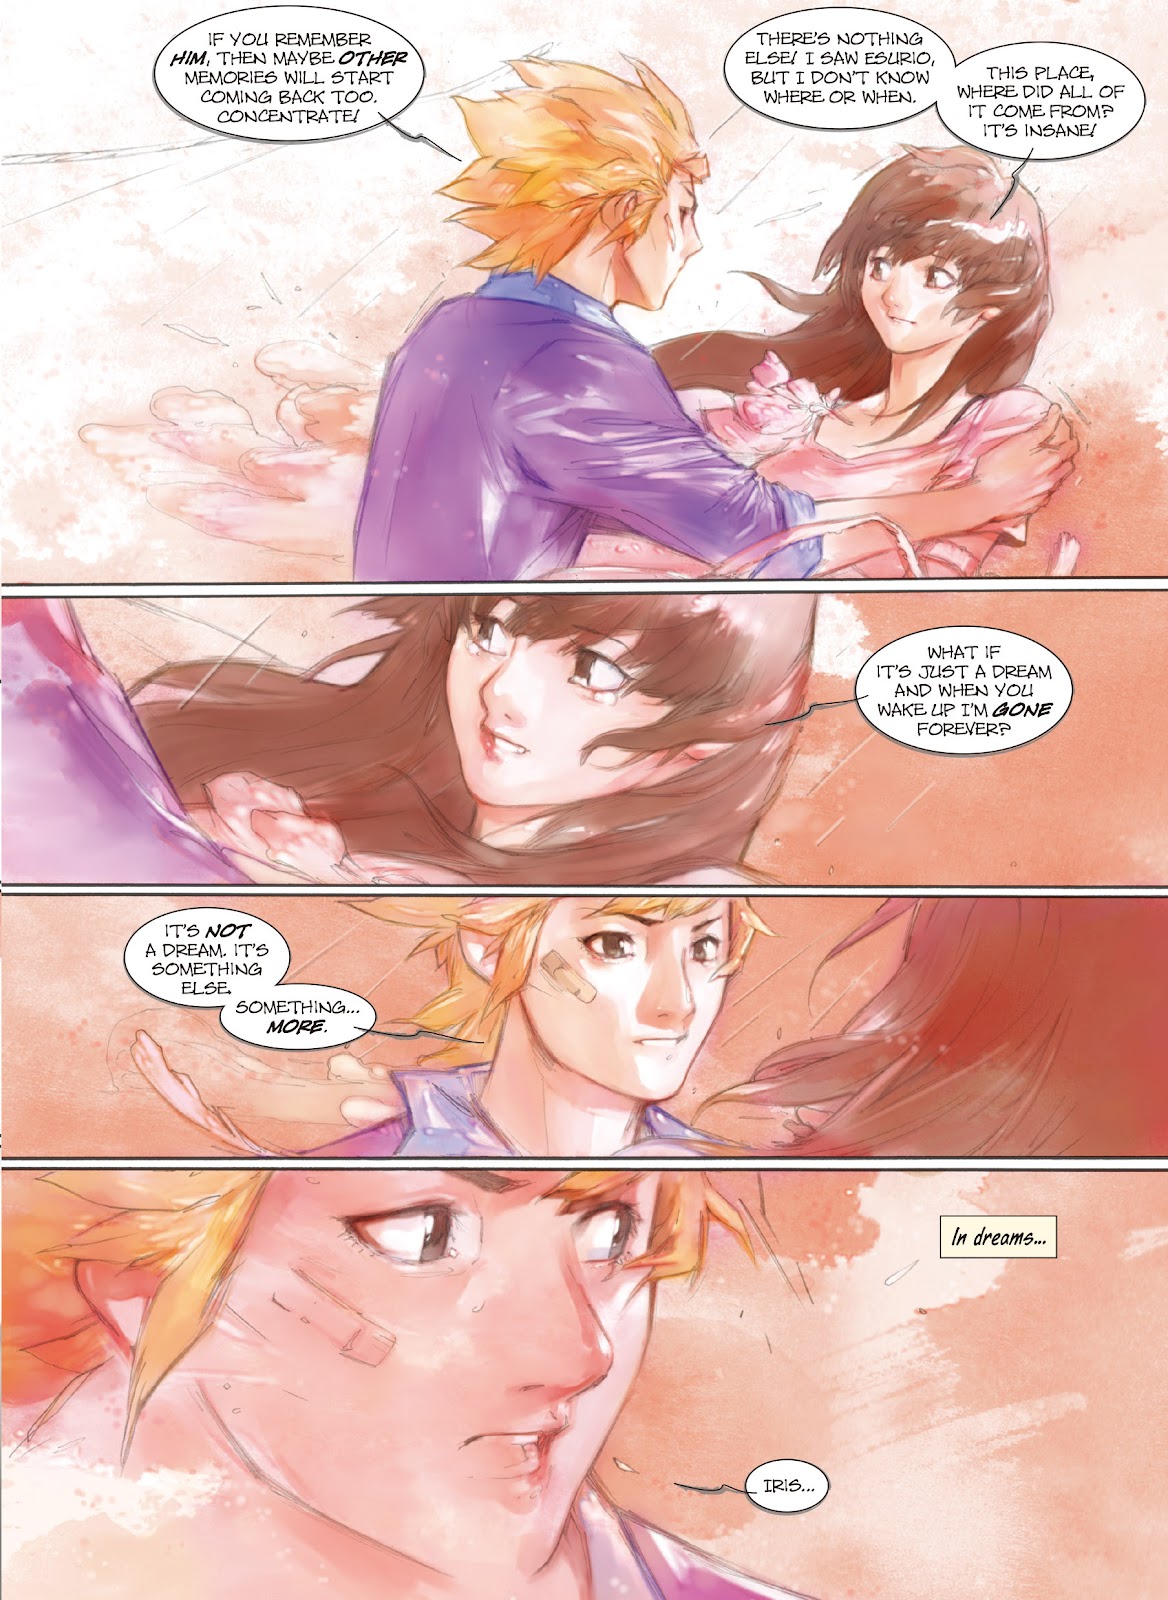 Makeshift Miracle: The Girl From Nowhere issue 8 - Page 9